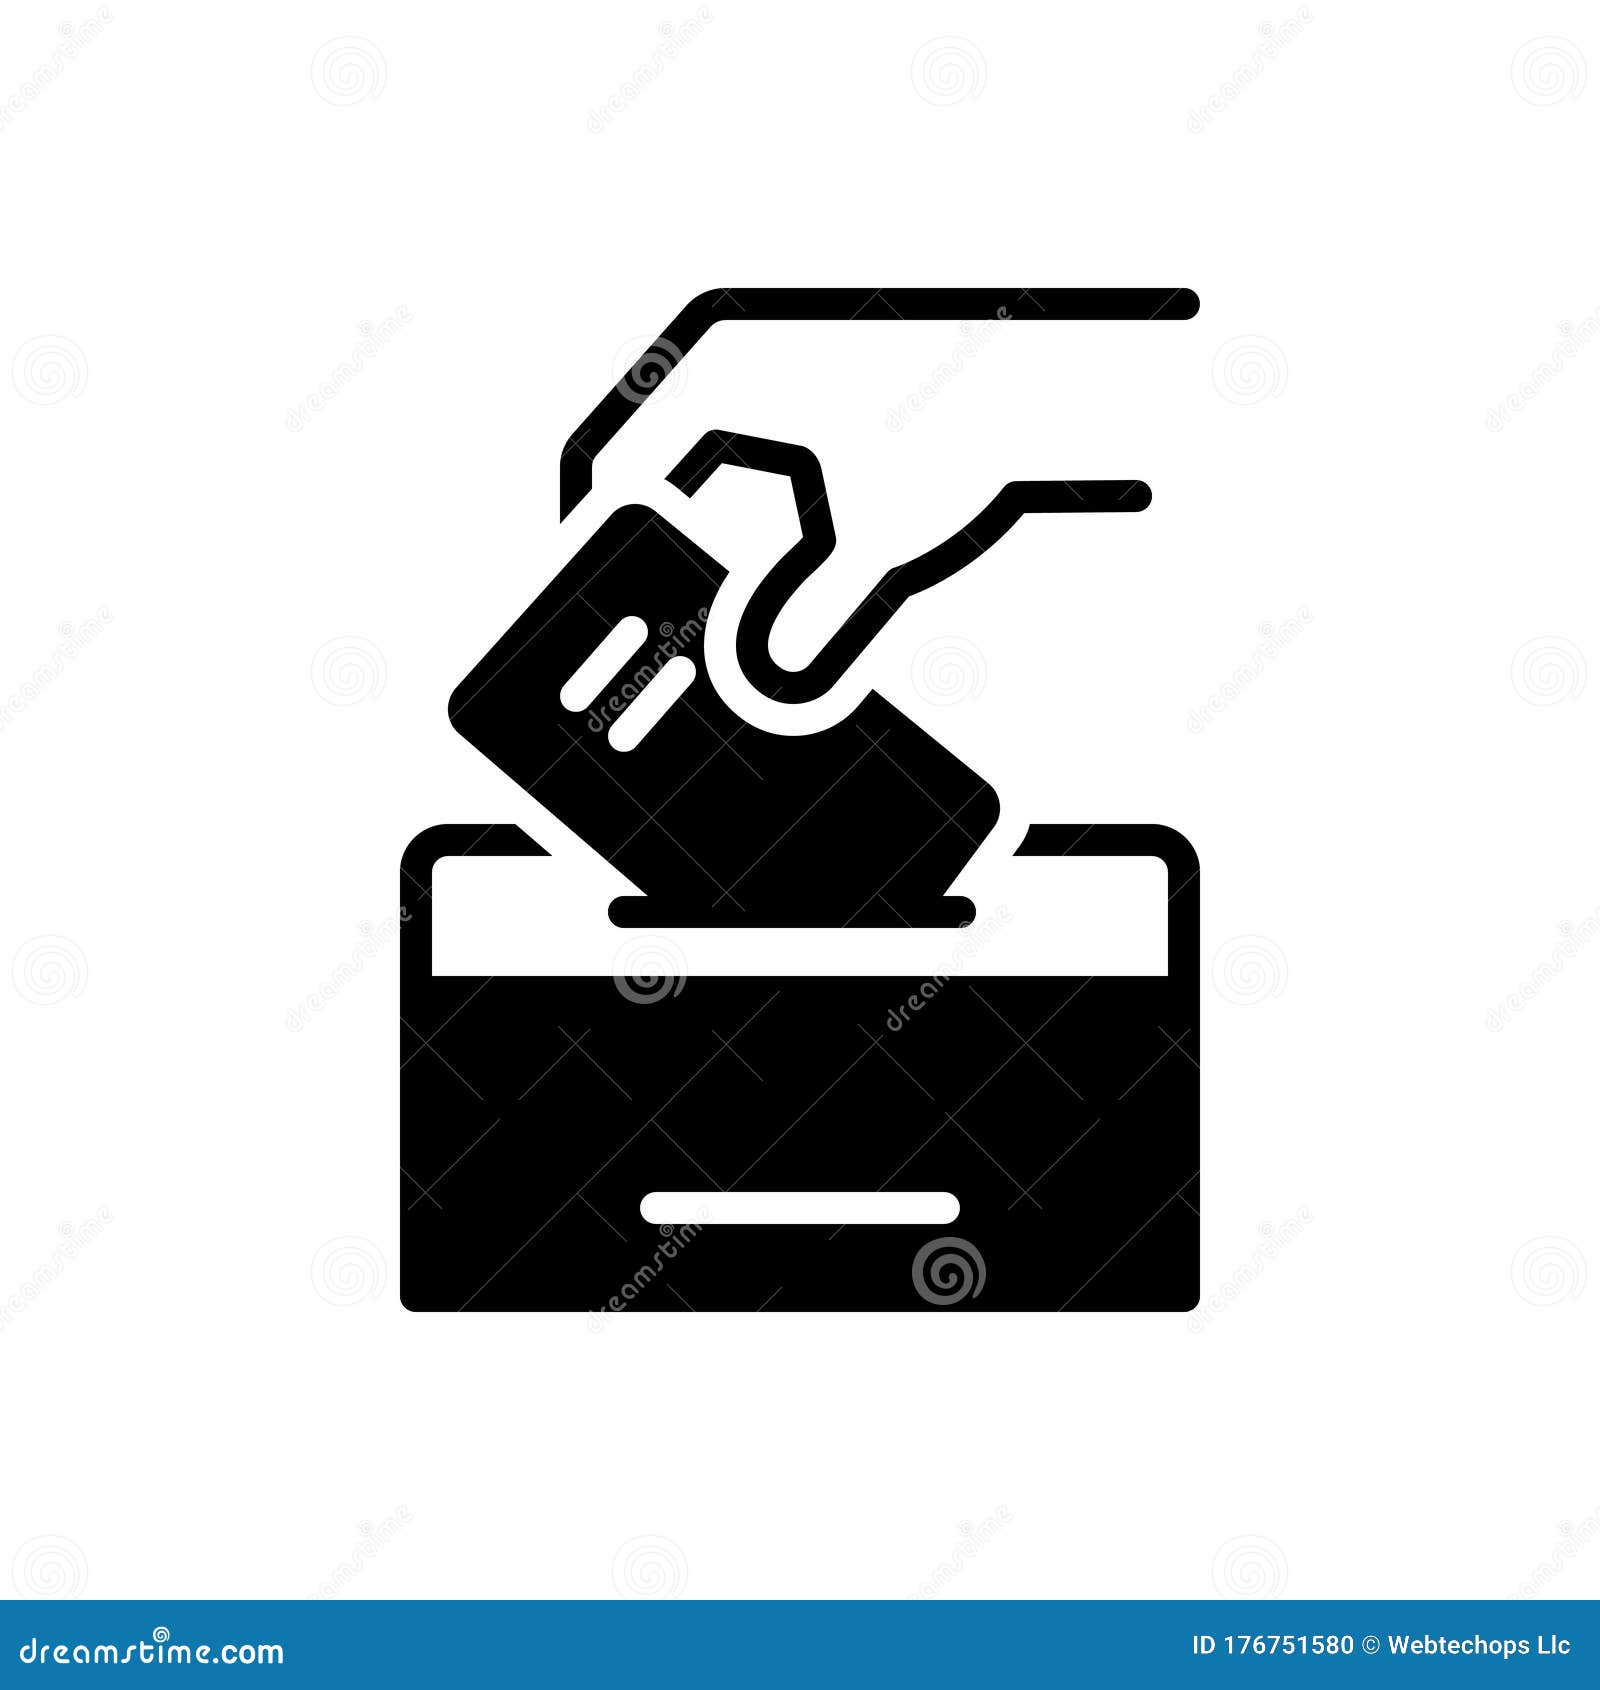 black solid icon for elect, vote for and ballot